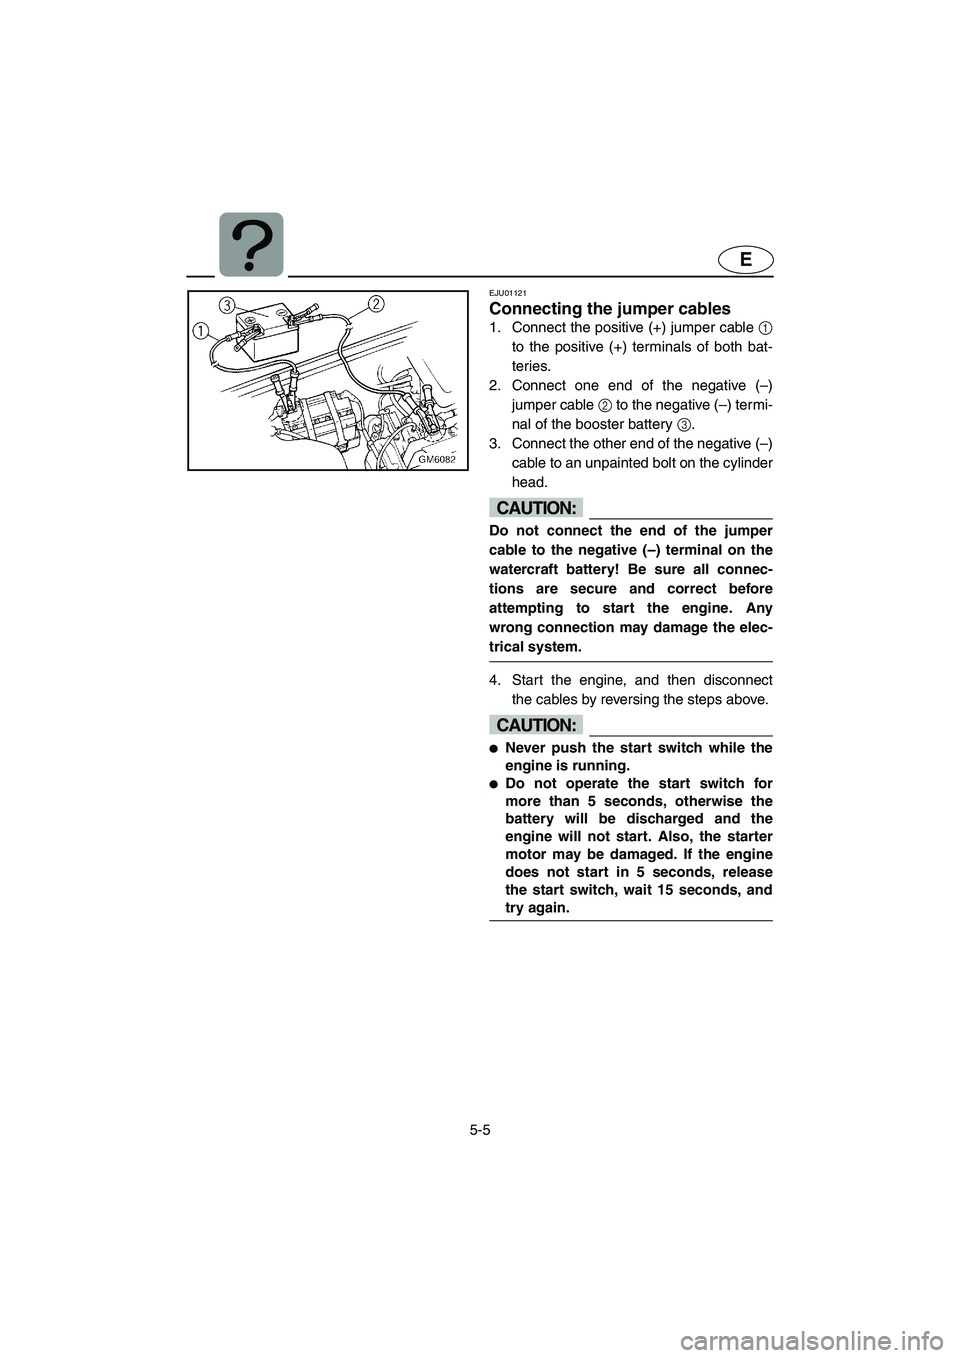 YAMAHA SUPERJET 2002  Owners Manual 5-5
E
EJU01121 
Connecting the jumper cables  
1. Connect the positive (+) jumper cable 1
to the positive (+) terminals of both bat-
teries. 
2. Connect one end of the negative (–)
jumper cable 2 to